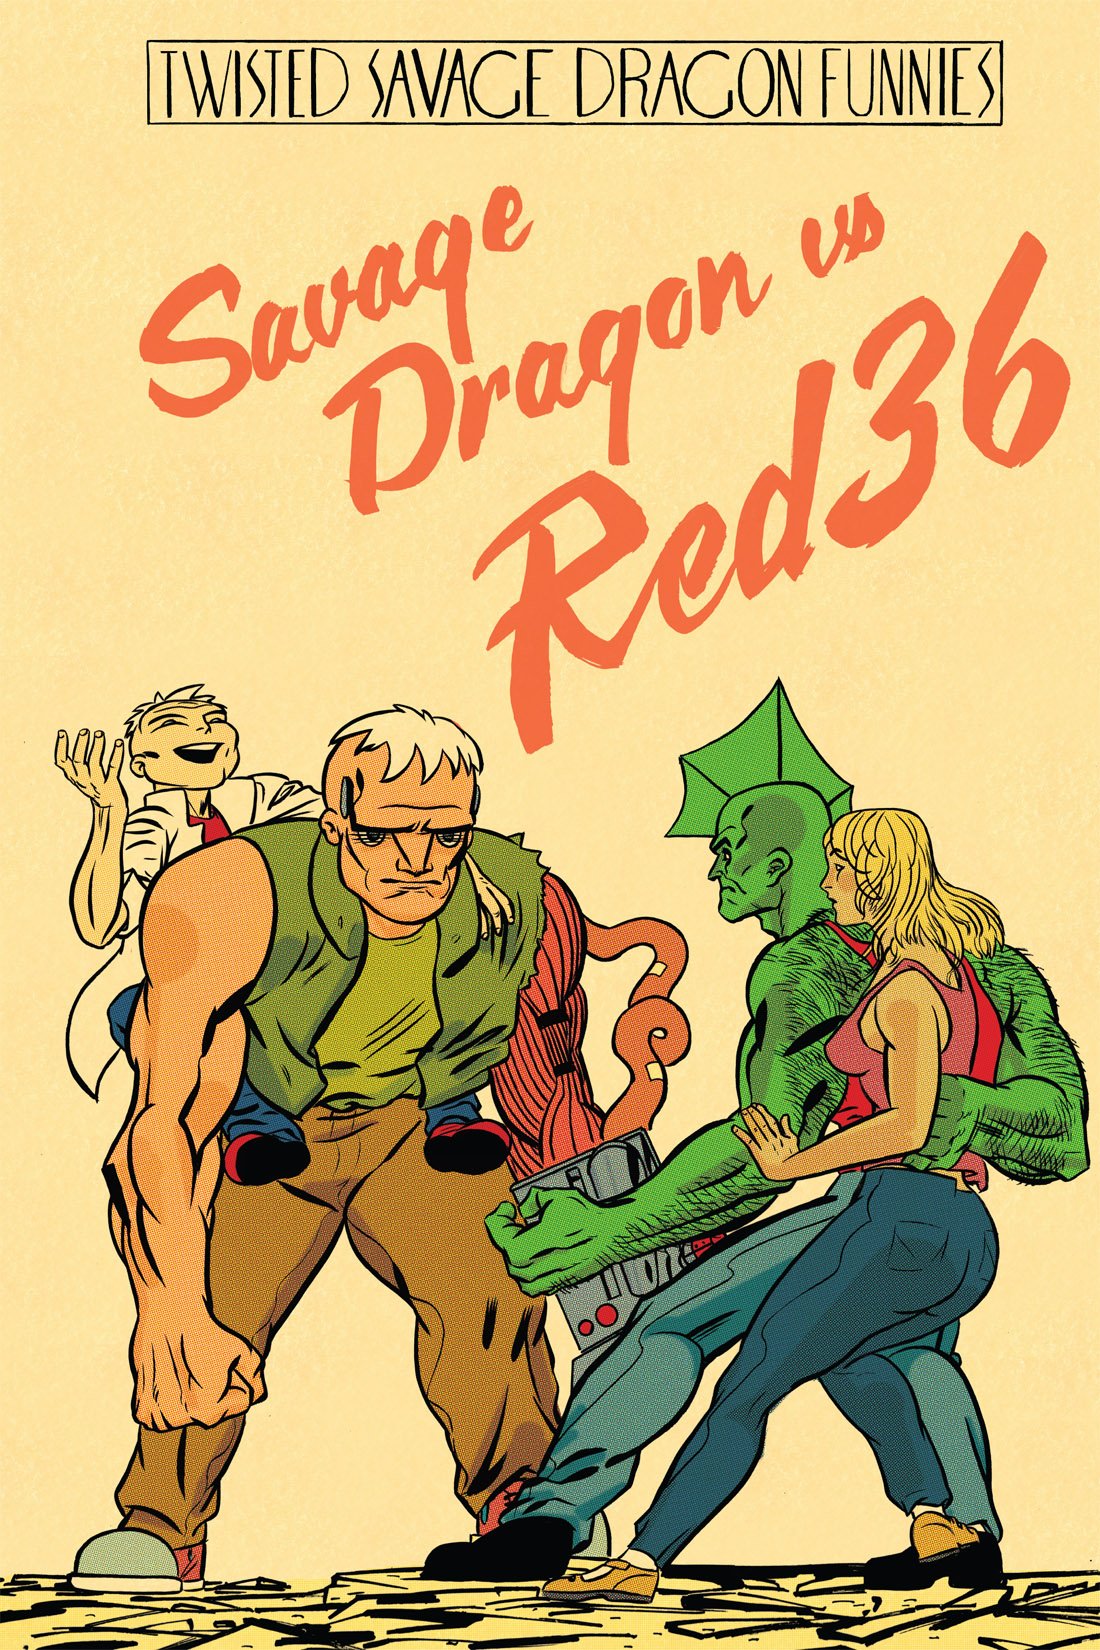 Read online Twisted Savage Dragon Funnies comic -  Issue # TPB - 65